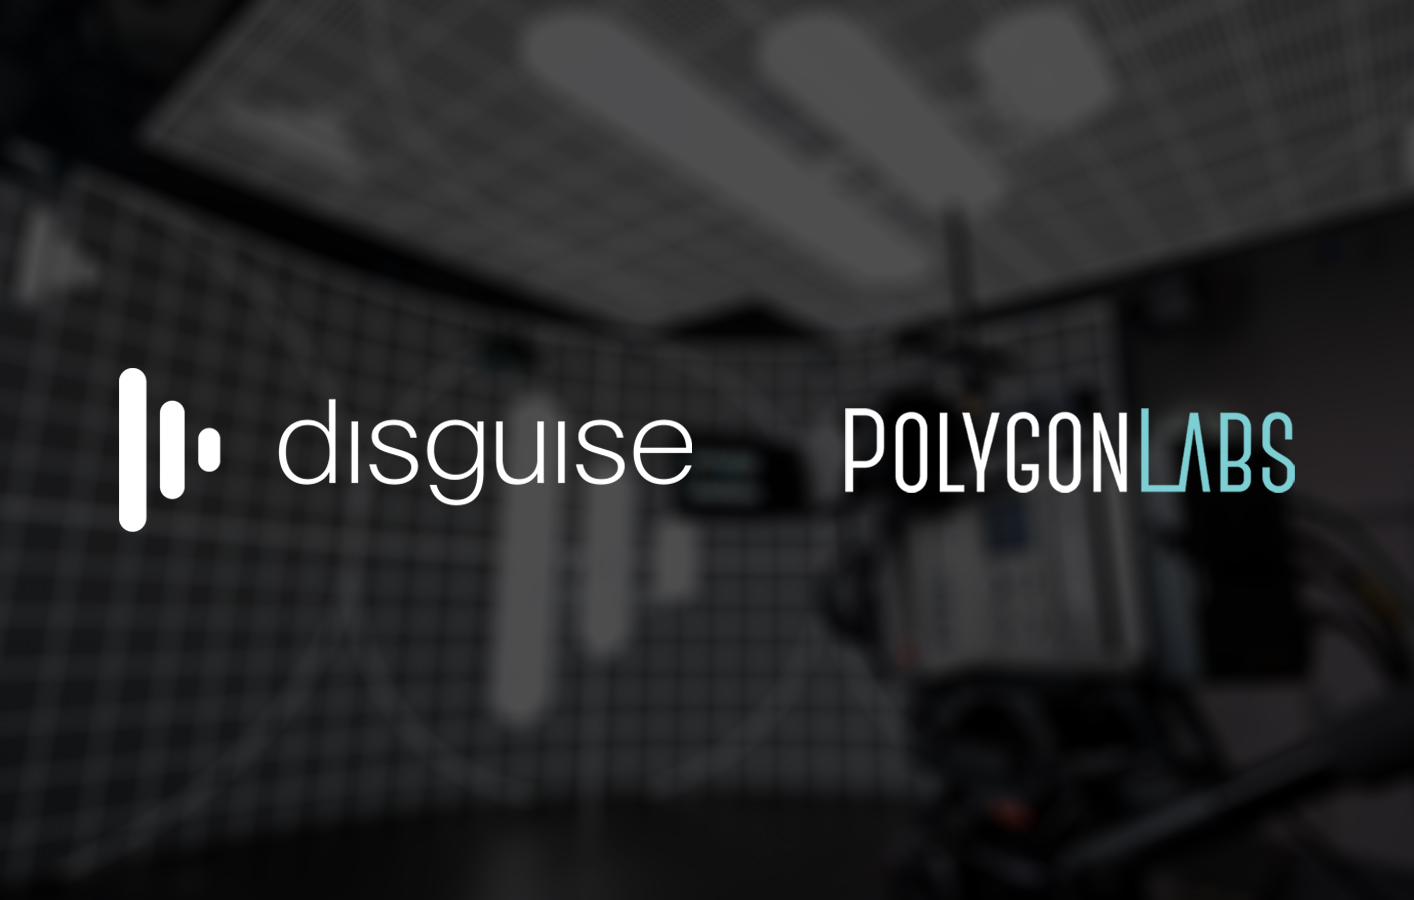 disguise acquires Polygon Labs to enable cloud-based workflows for broadcasters